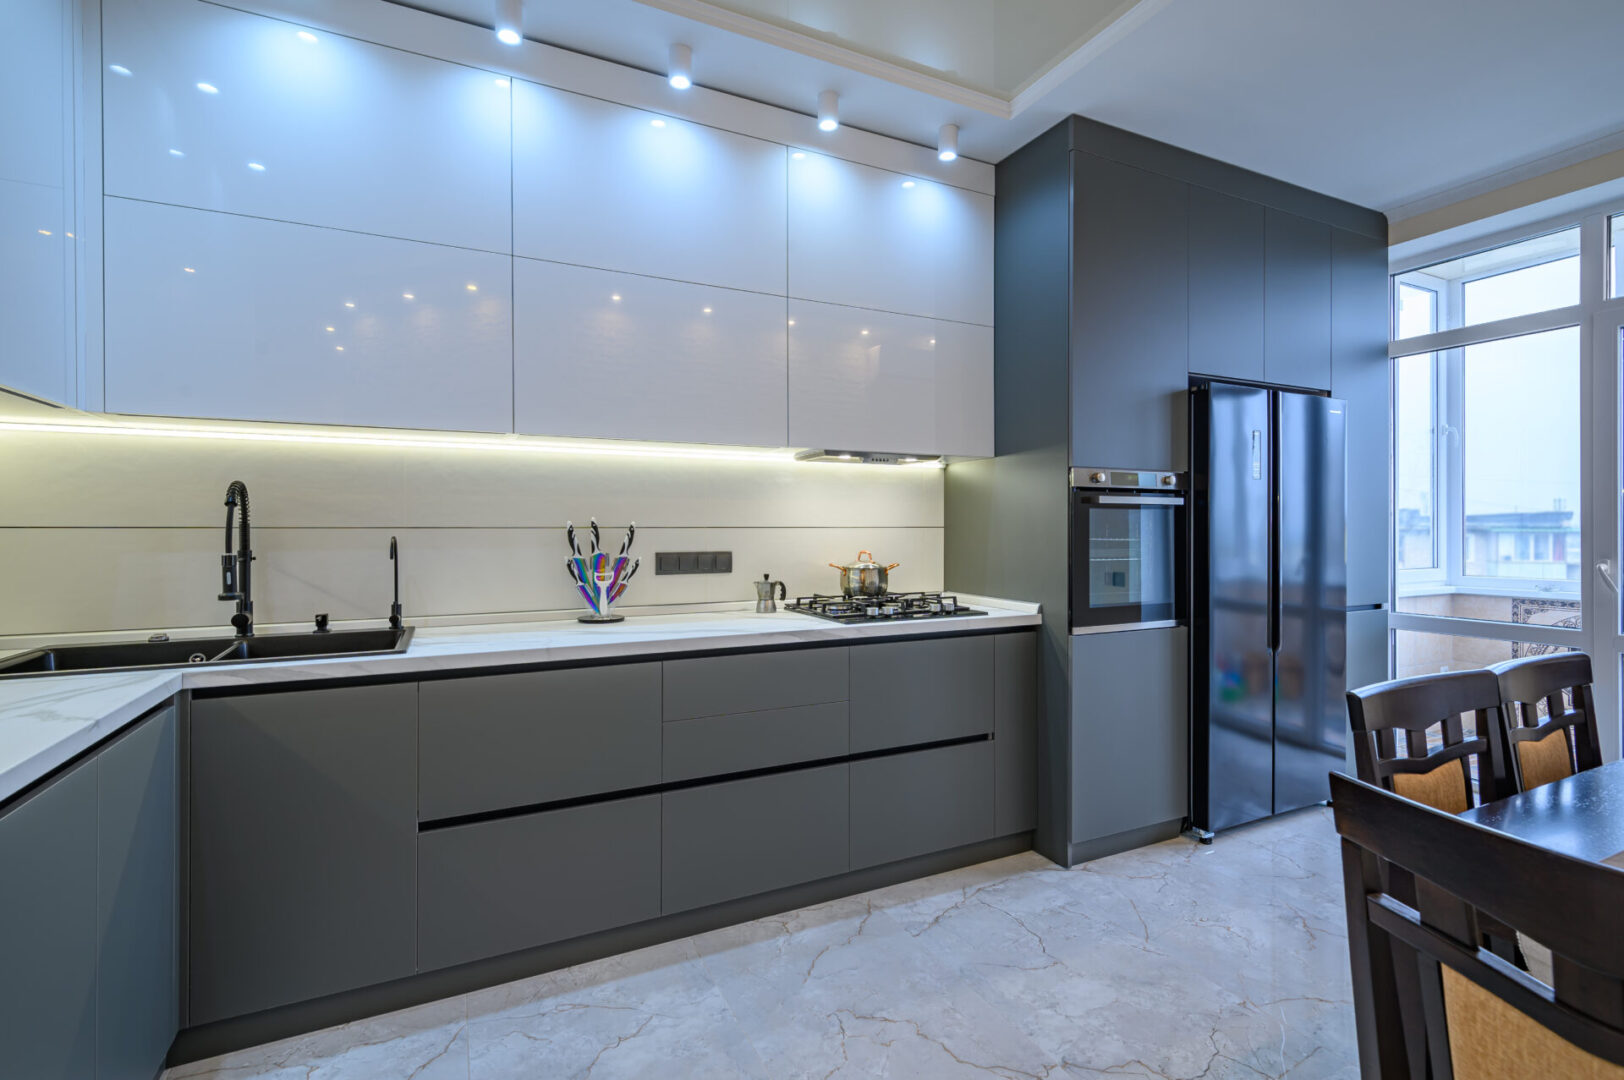 A kitchen with grey cabinets and white walls.